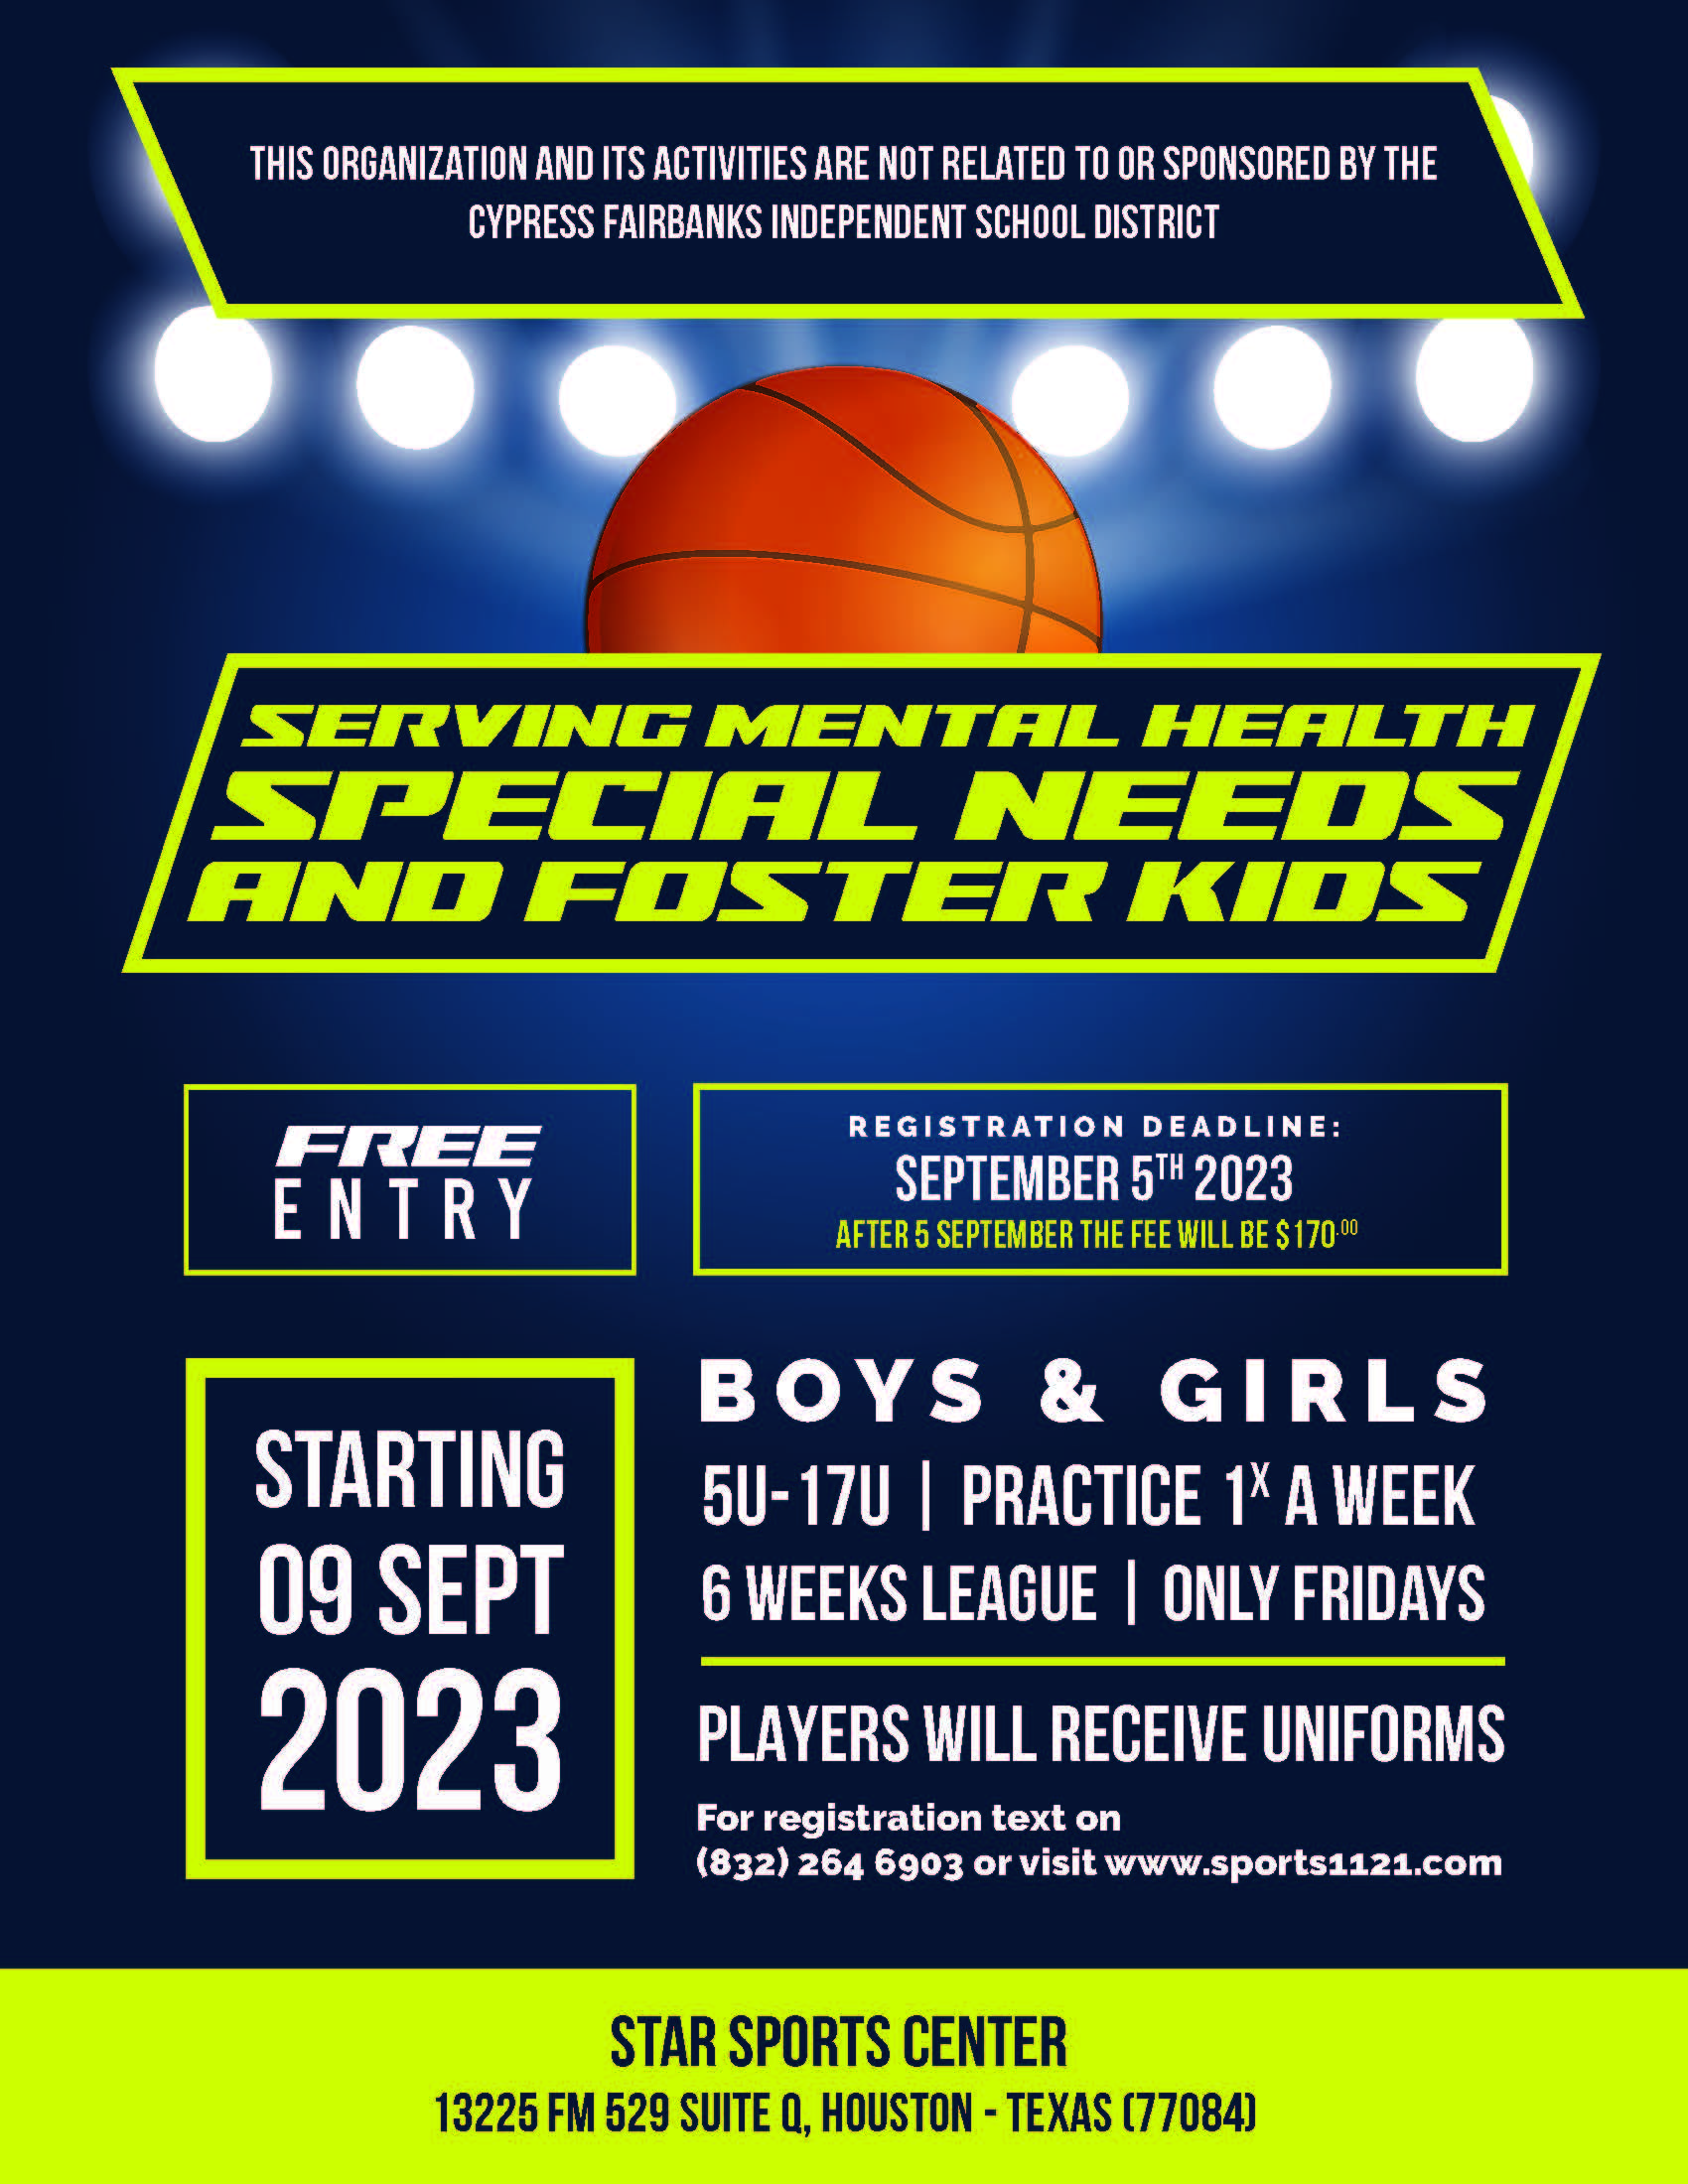 Star Sports Center  Serviing mental health special needs and foster kids  Boys & girls  Practice once on Fridays a week for 6 weeks Players will receive uniforms Starting September 9, 2023  For registration text 832-264-6903 or visit www.sports1121.com  This activity is not related to or sponsored by the Cypress-Fairbanks Independent School District.